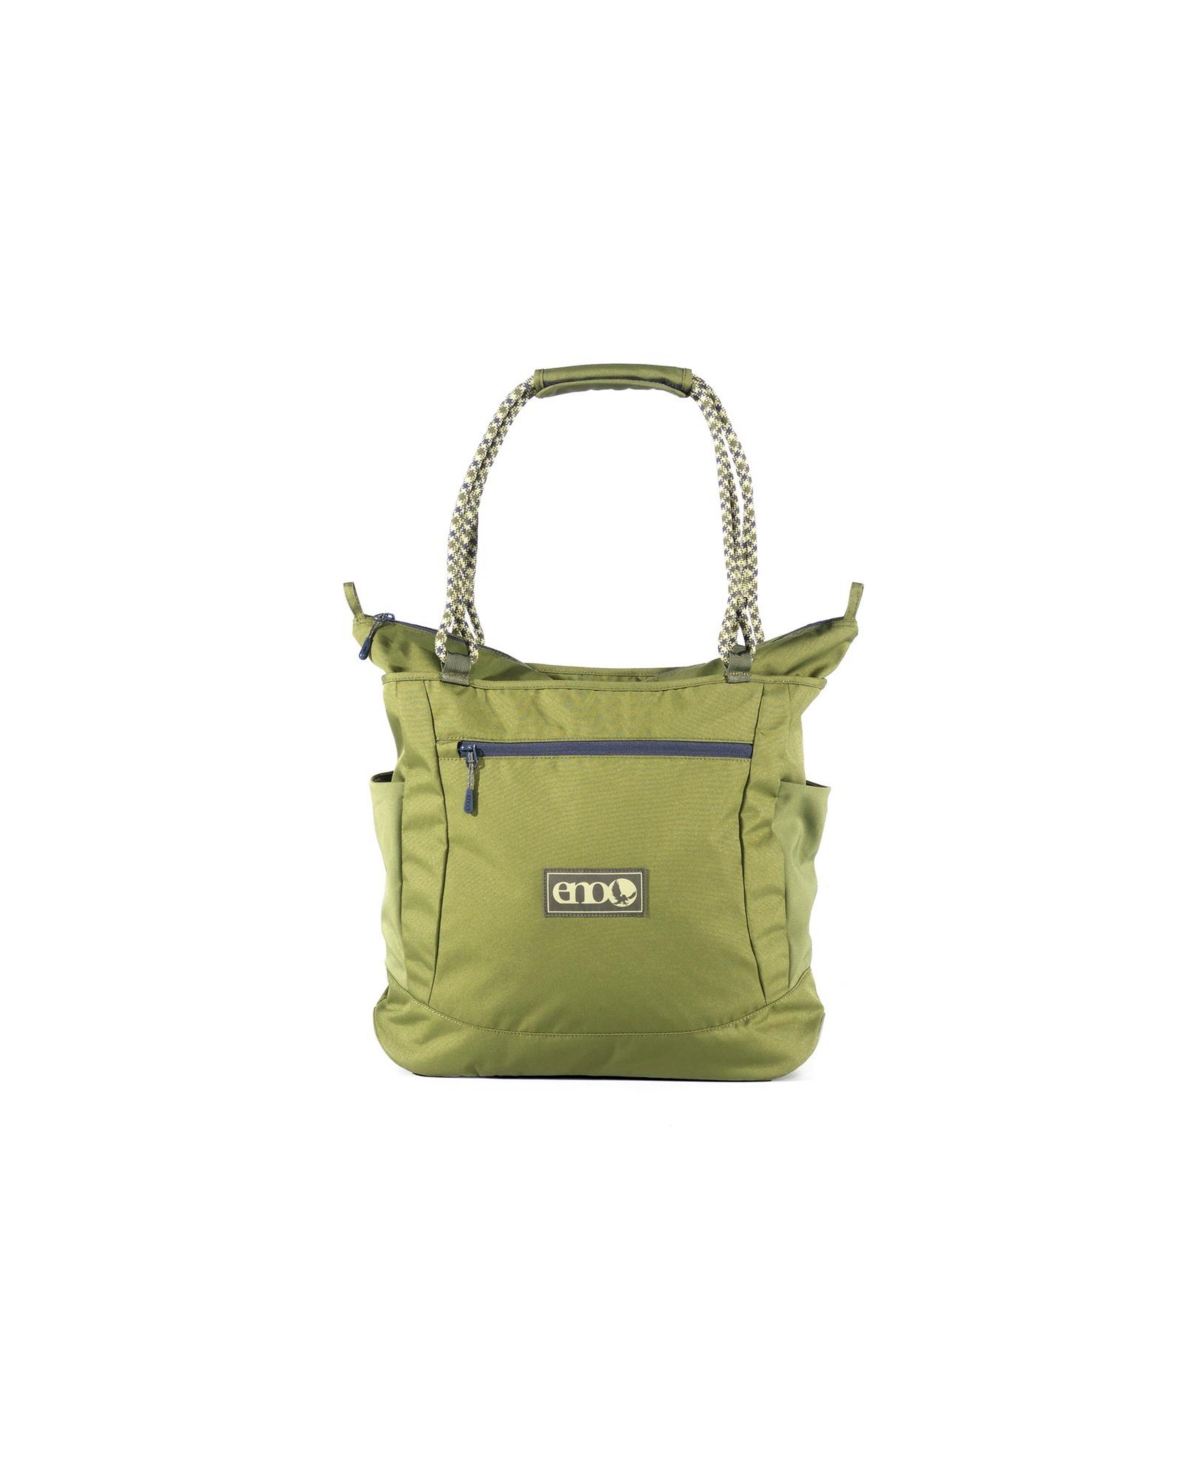 Relay Tote - 35L Outdoor Travel and Tote Bag for Men and Women - For Camping, Backpacking, Beach, and Festivals - Moss - Moss